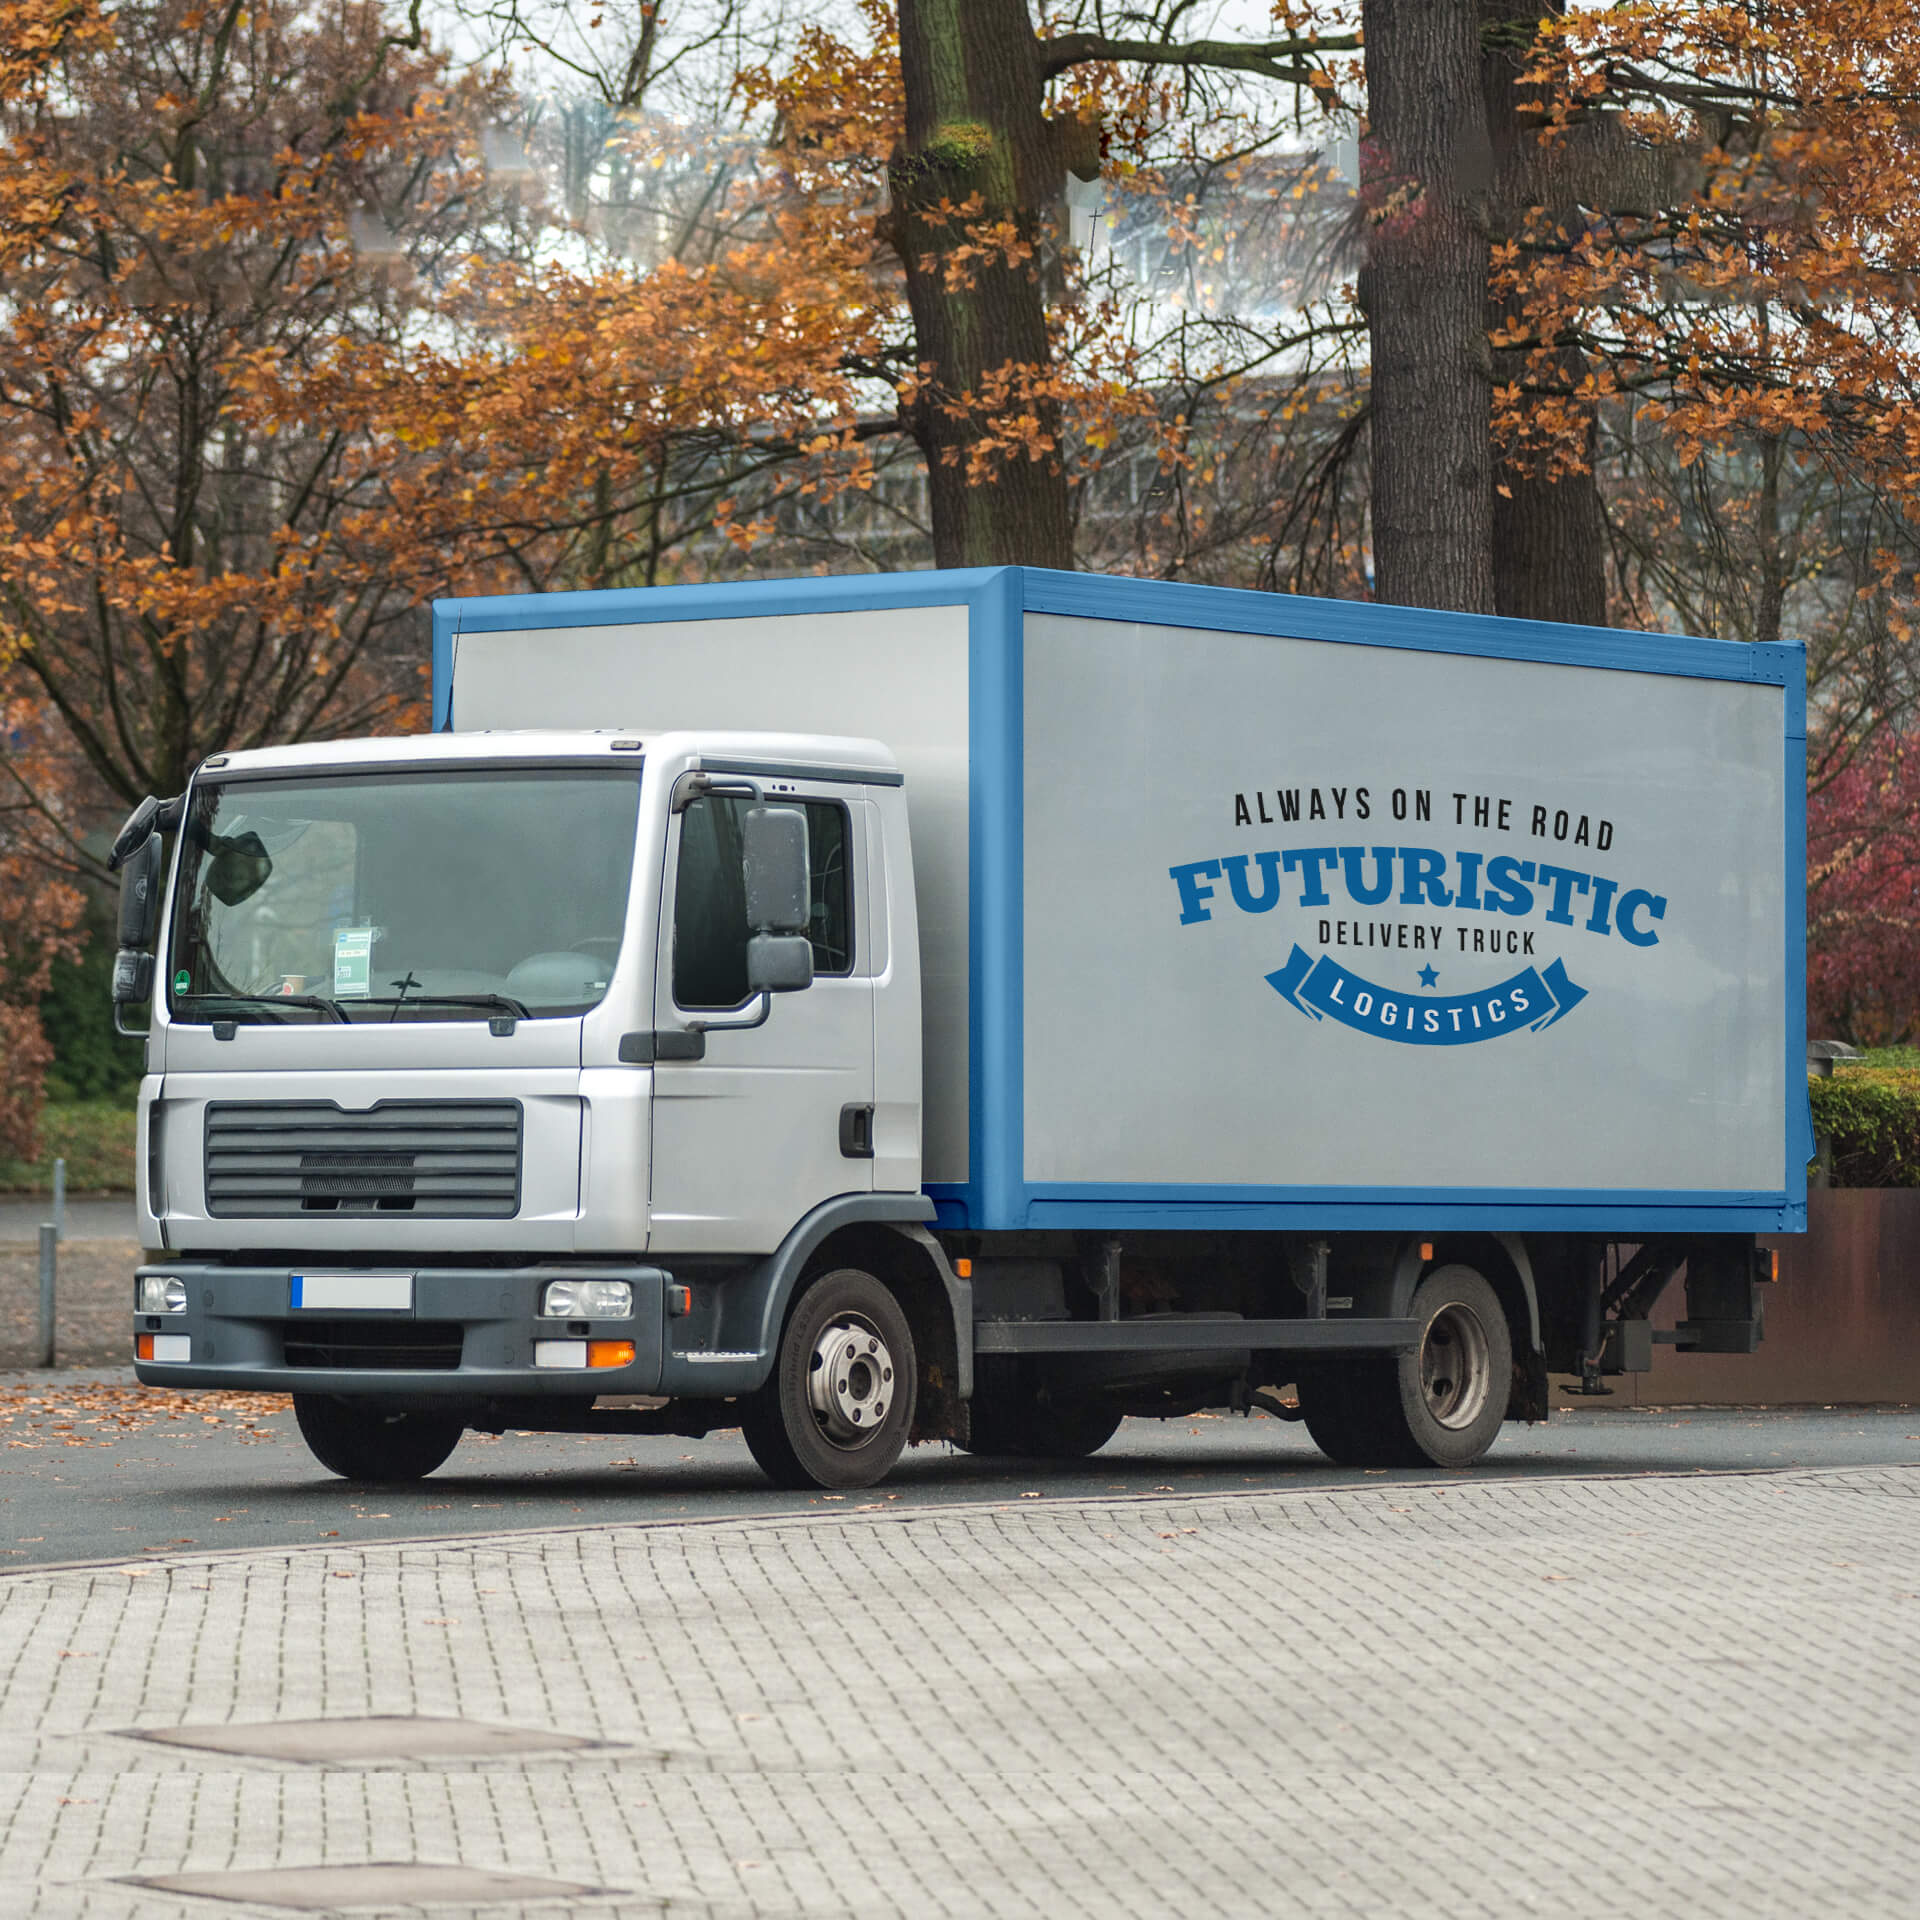 Delivery truck logo Image